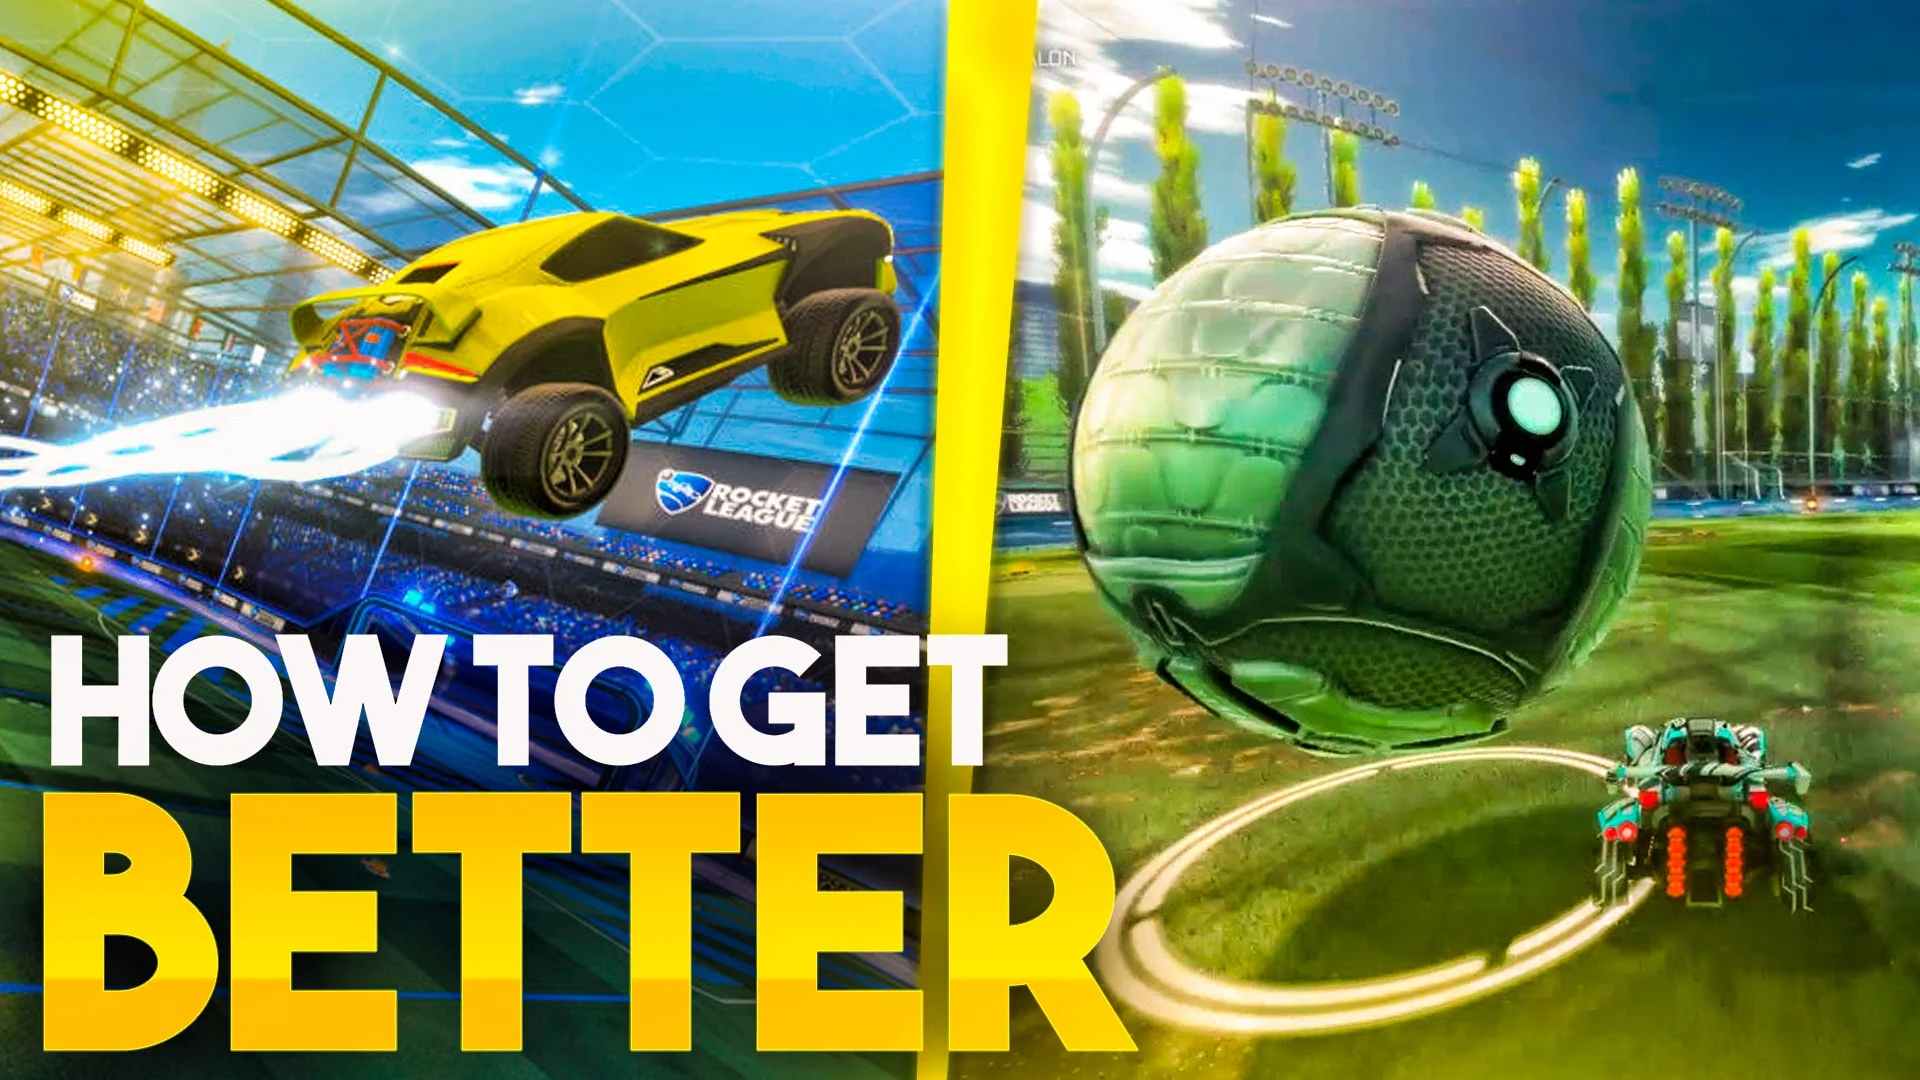 How to Get Better at Rocket League